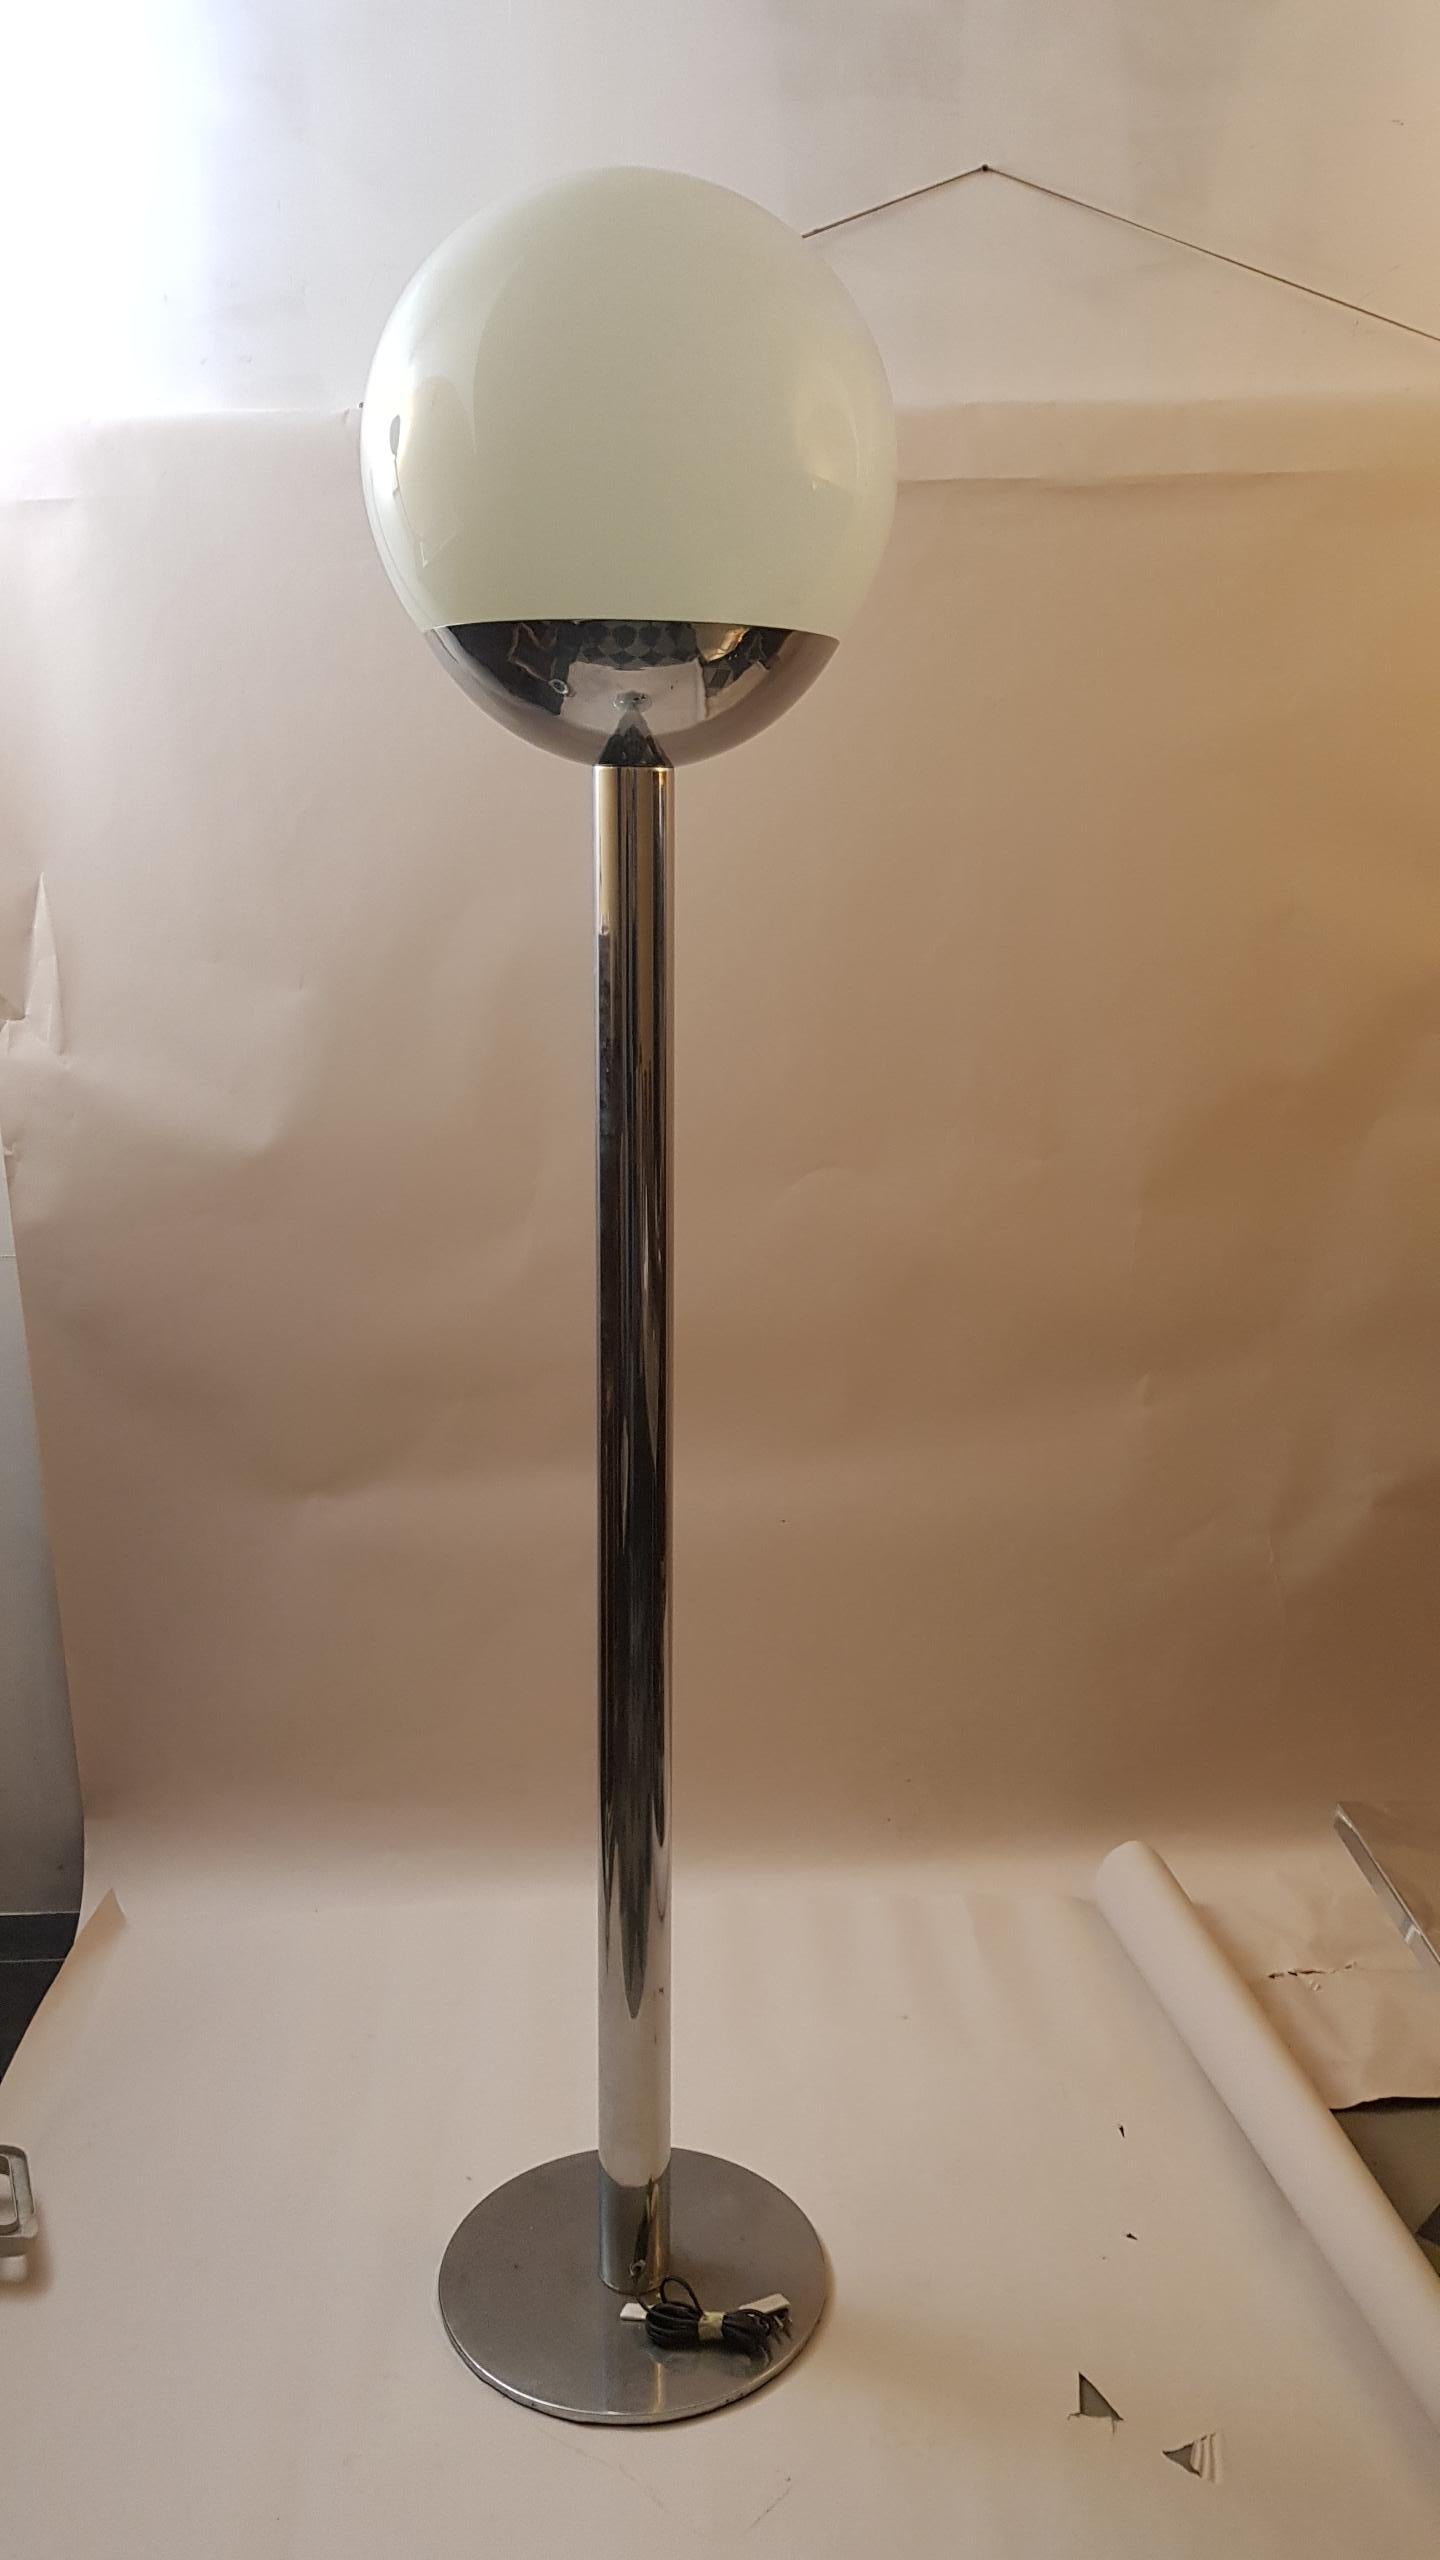 Big chromed steel floor lamp with white glass bowl Mod p428 Pia guidotti crippa Luci, circa 1970.

Electrical system to be reviewed.